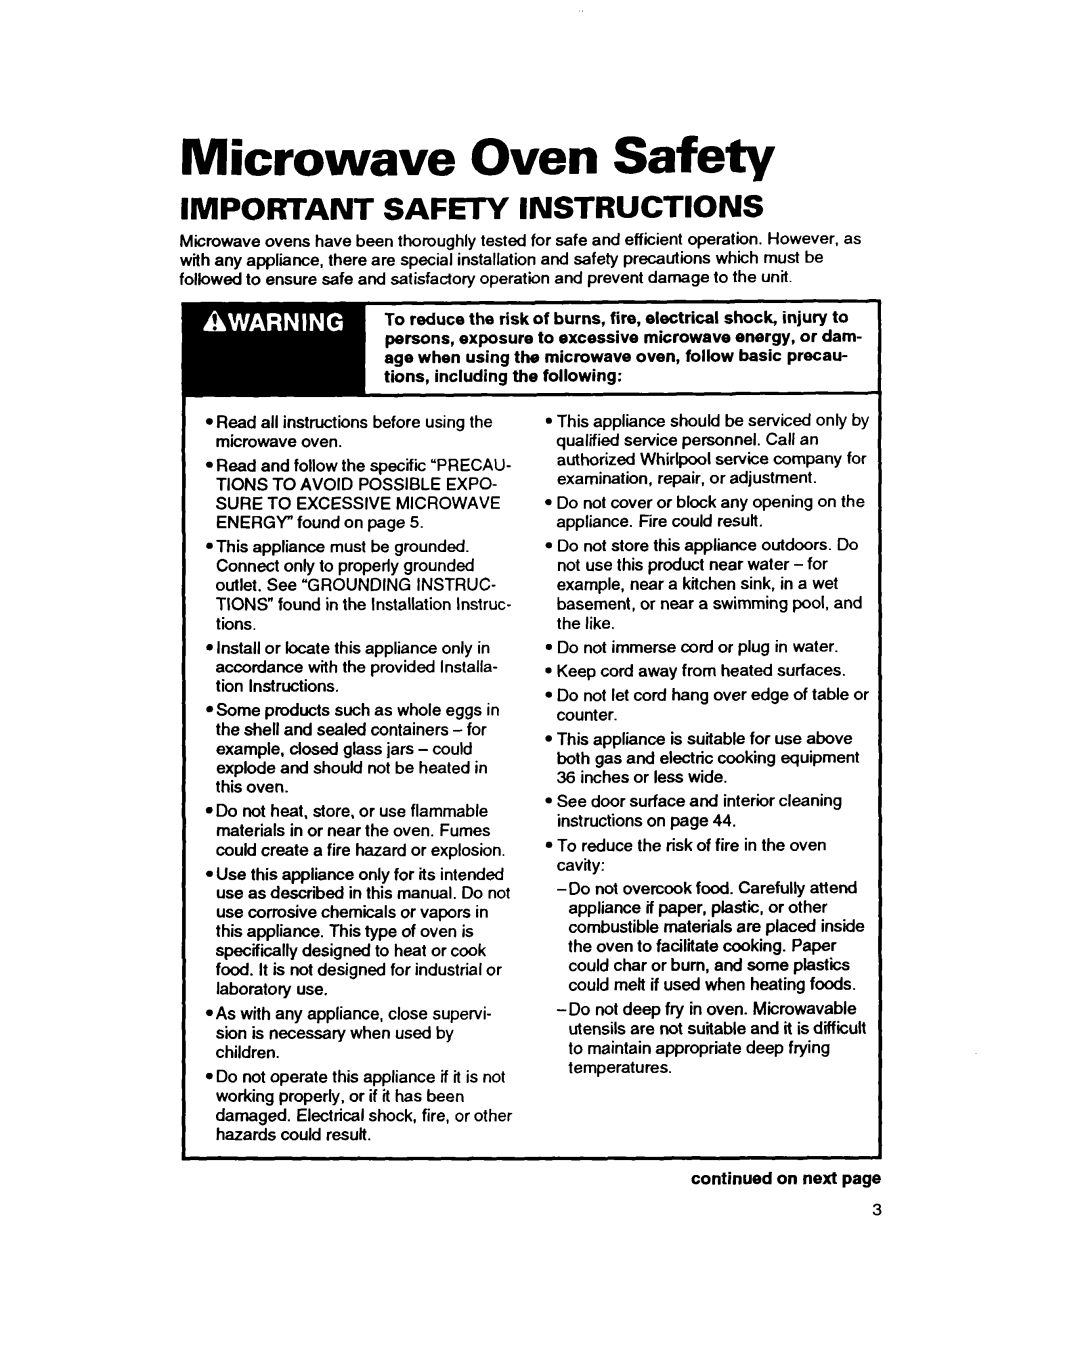 Whirlpool MH7115XB warranty Important Safety Instructions, Microwave Oven Safety 